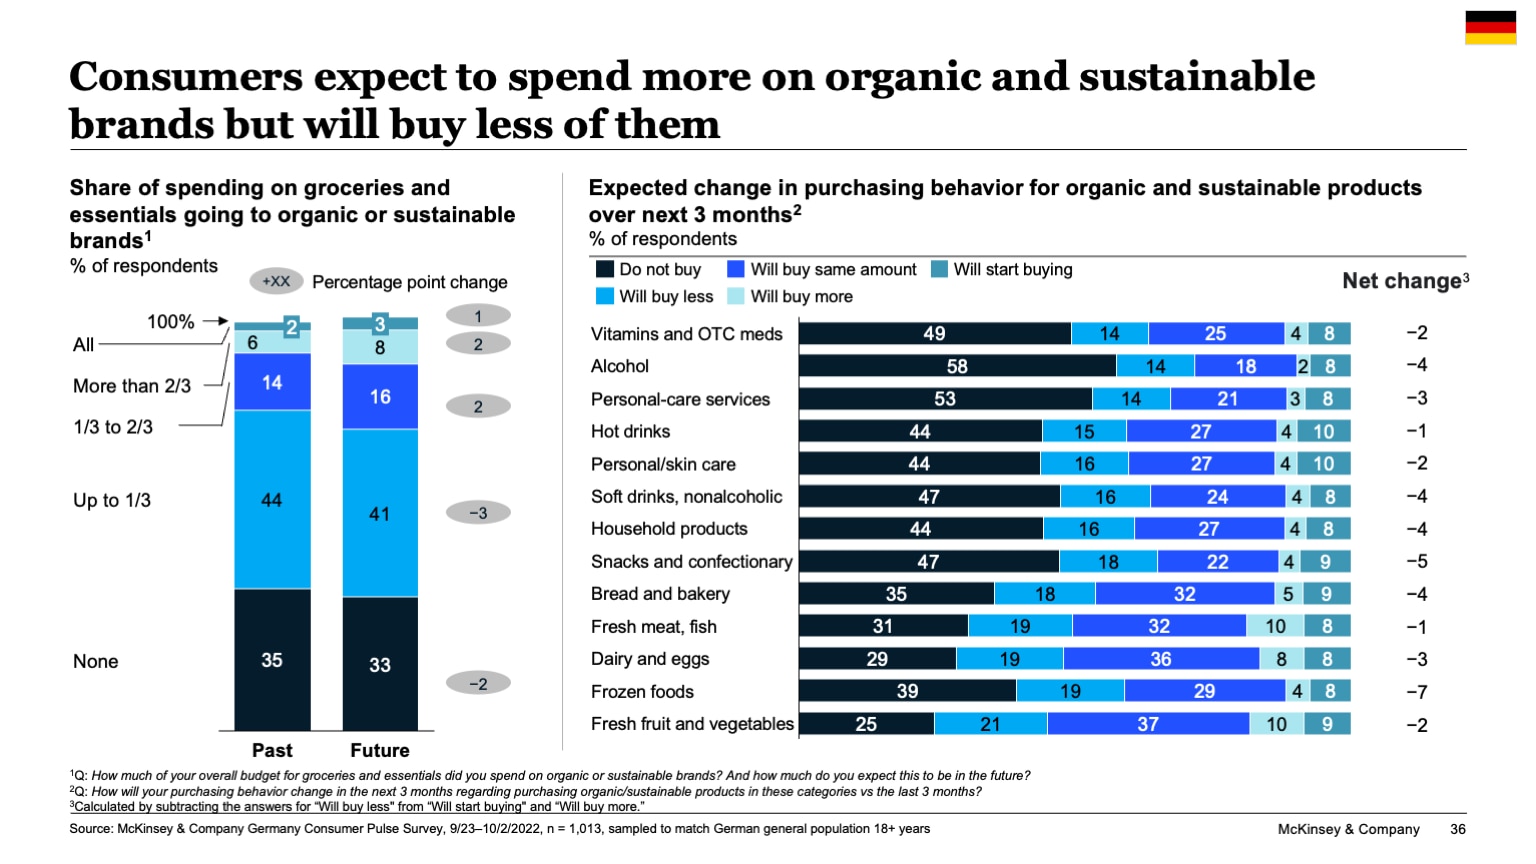 Consumers expect to spend more on organic and sustainable brands but will buy less of them